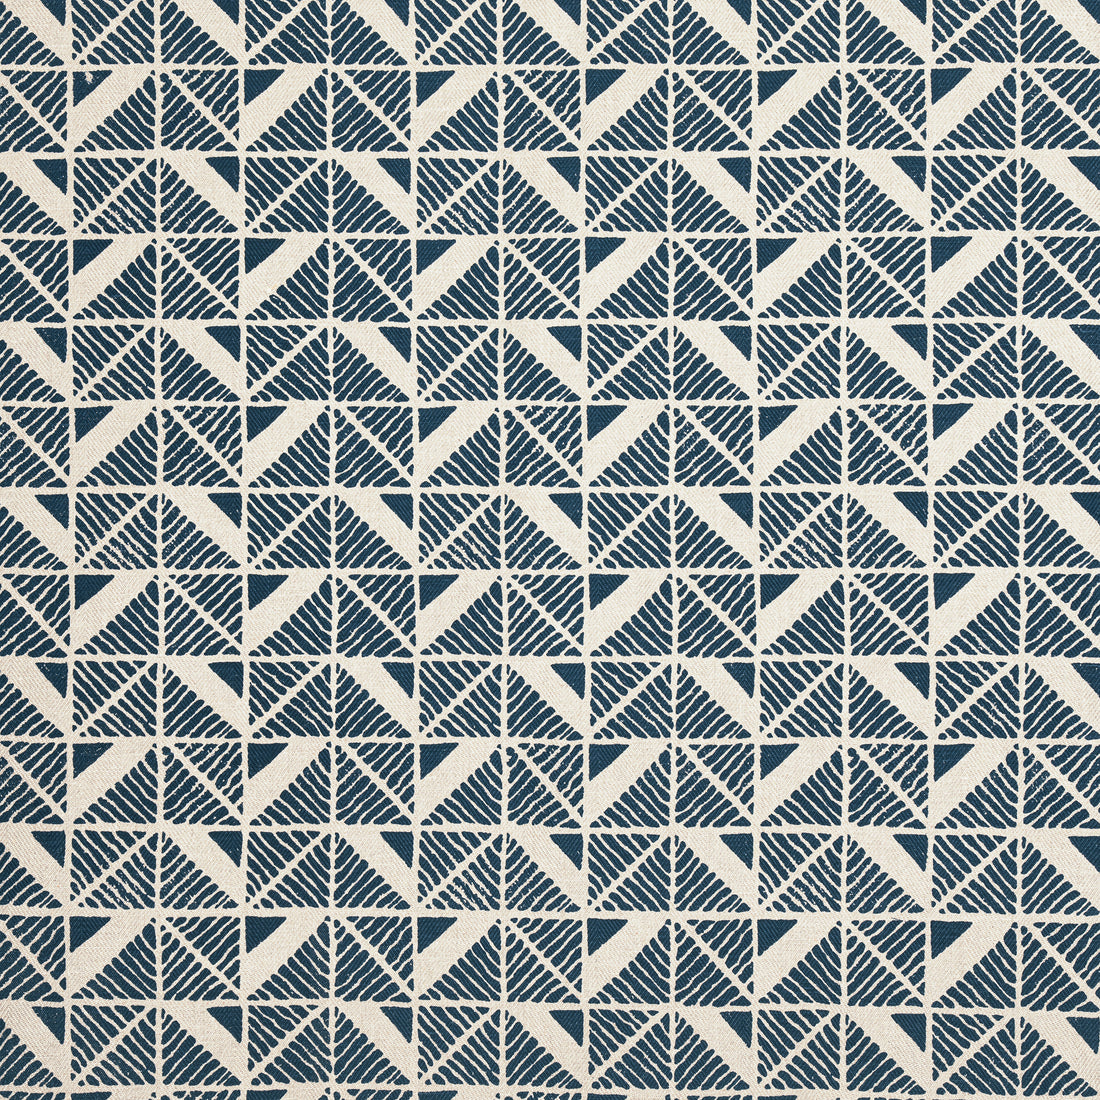 Bloomsbury Square fabric in navy color - pattern number AF23119 - by Anna French in the Willow Tree collection